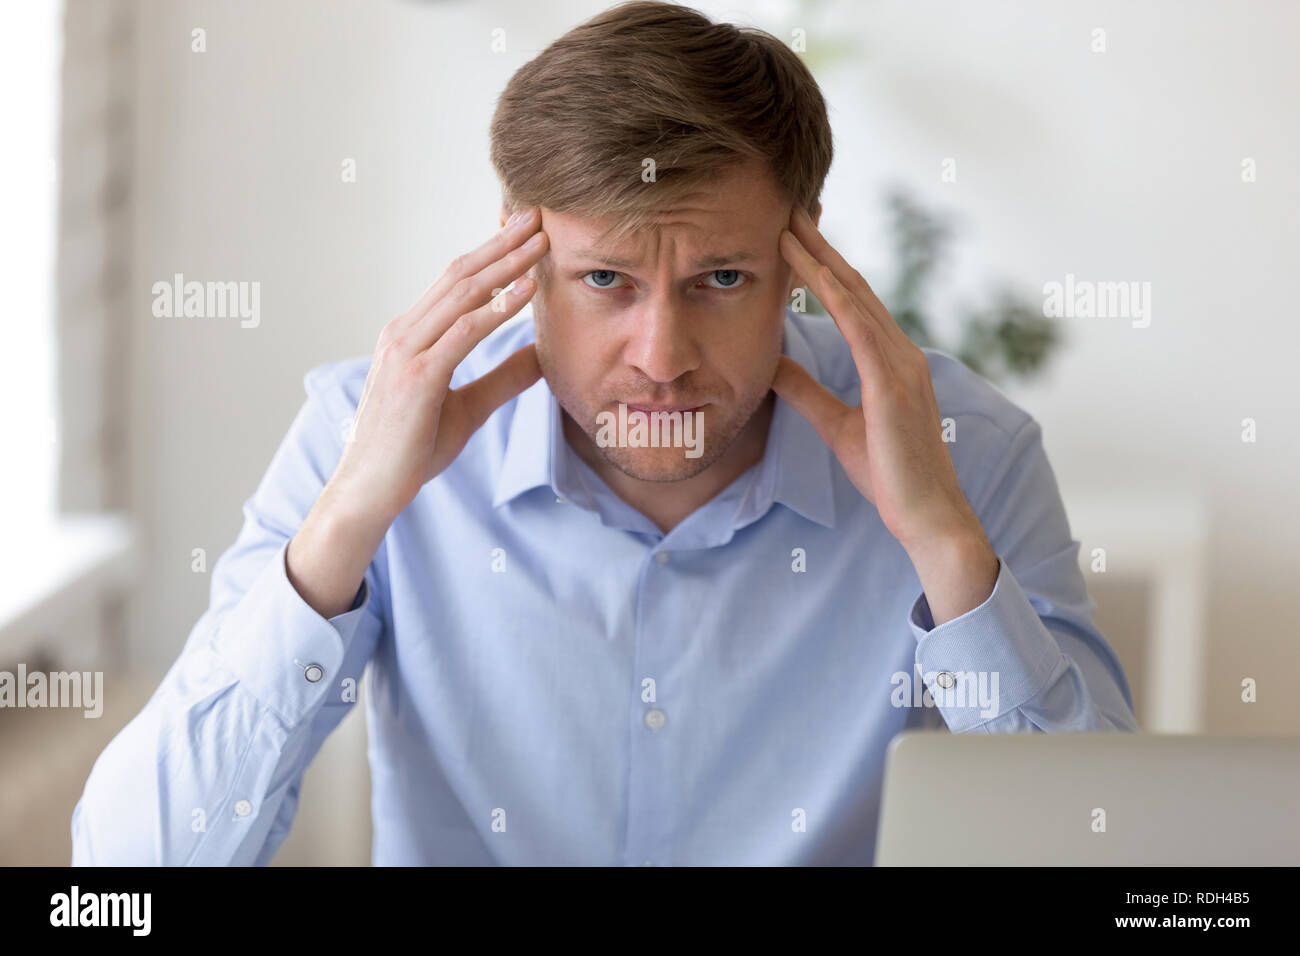 Head shot portrait of thoughtful businessman touching temples Stock Photo